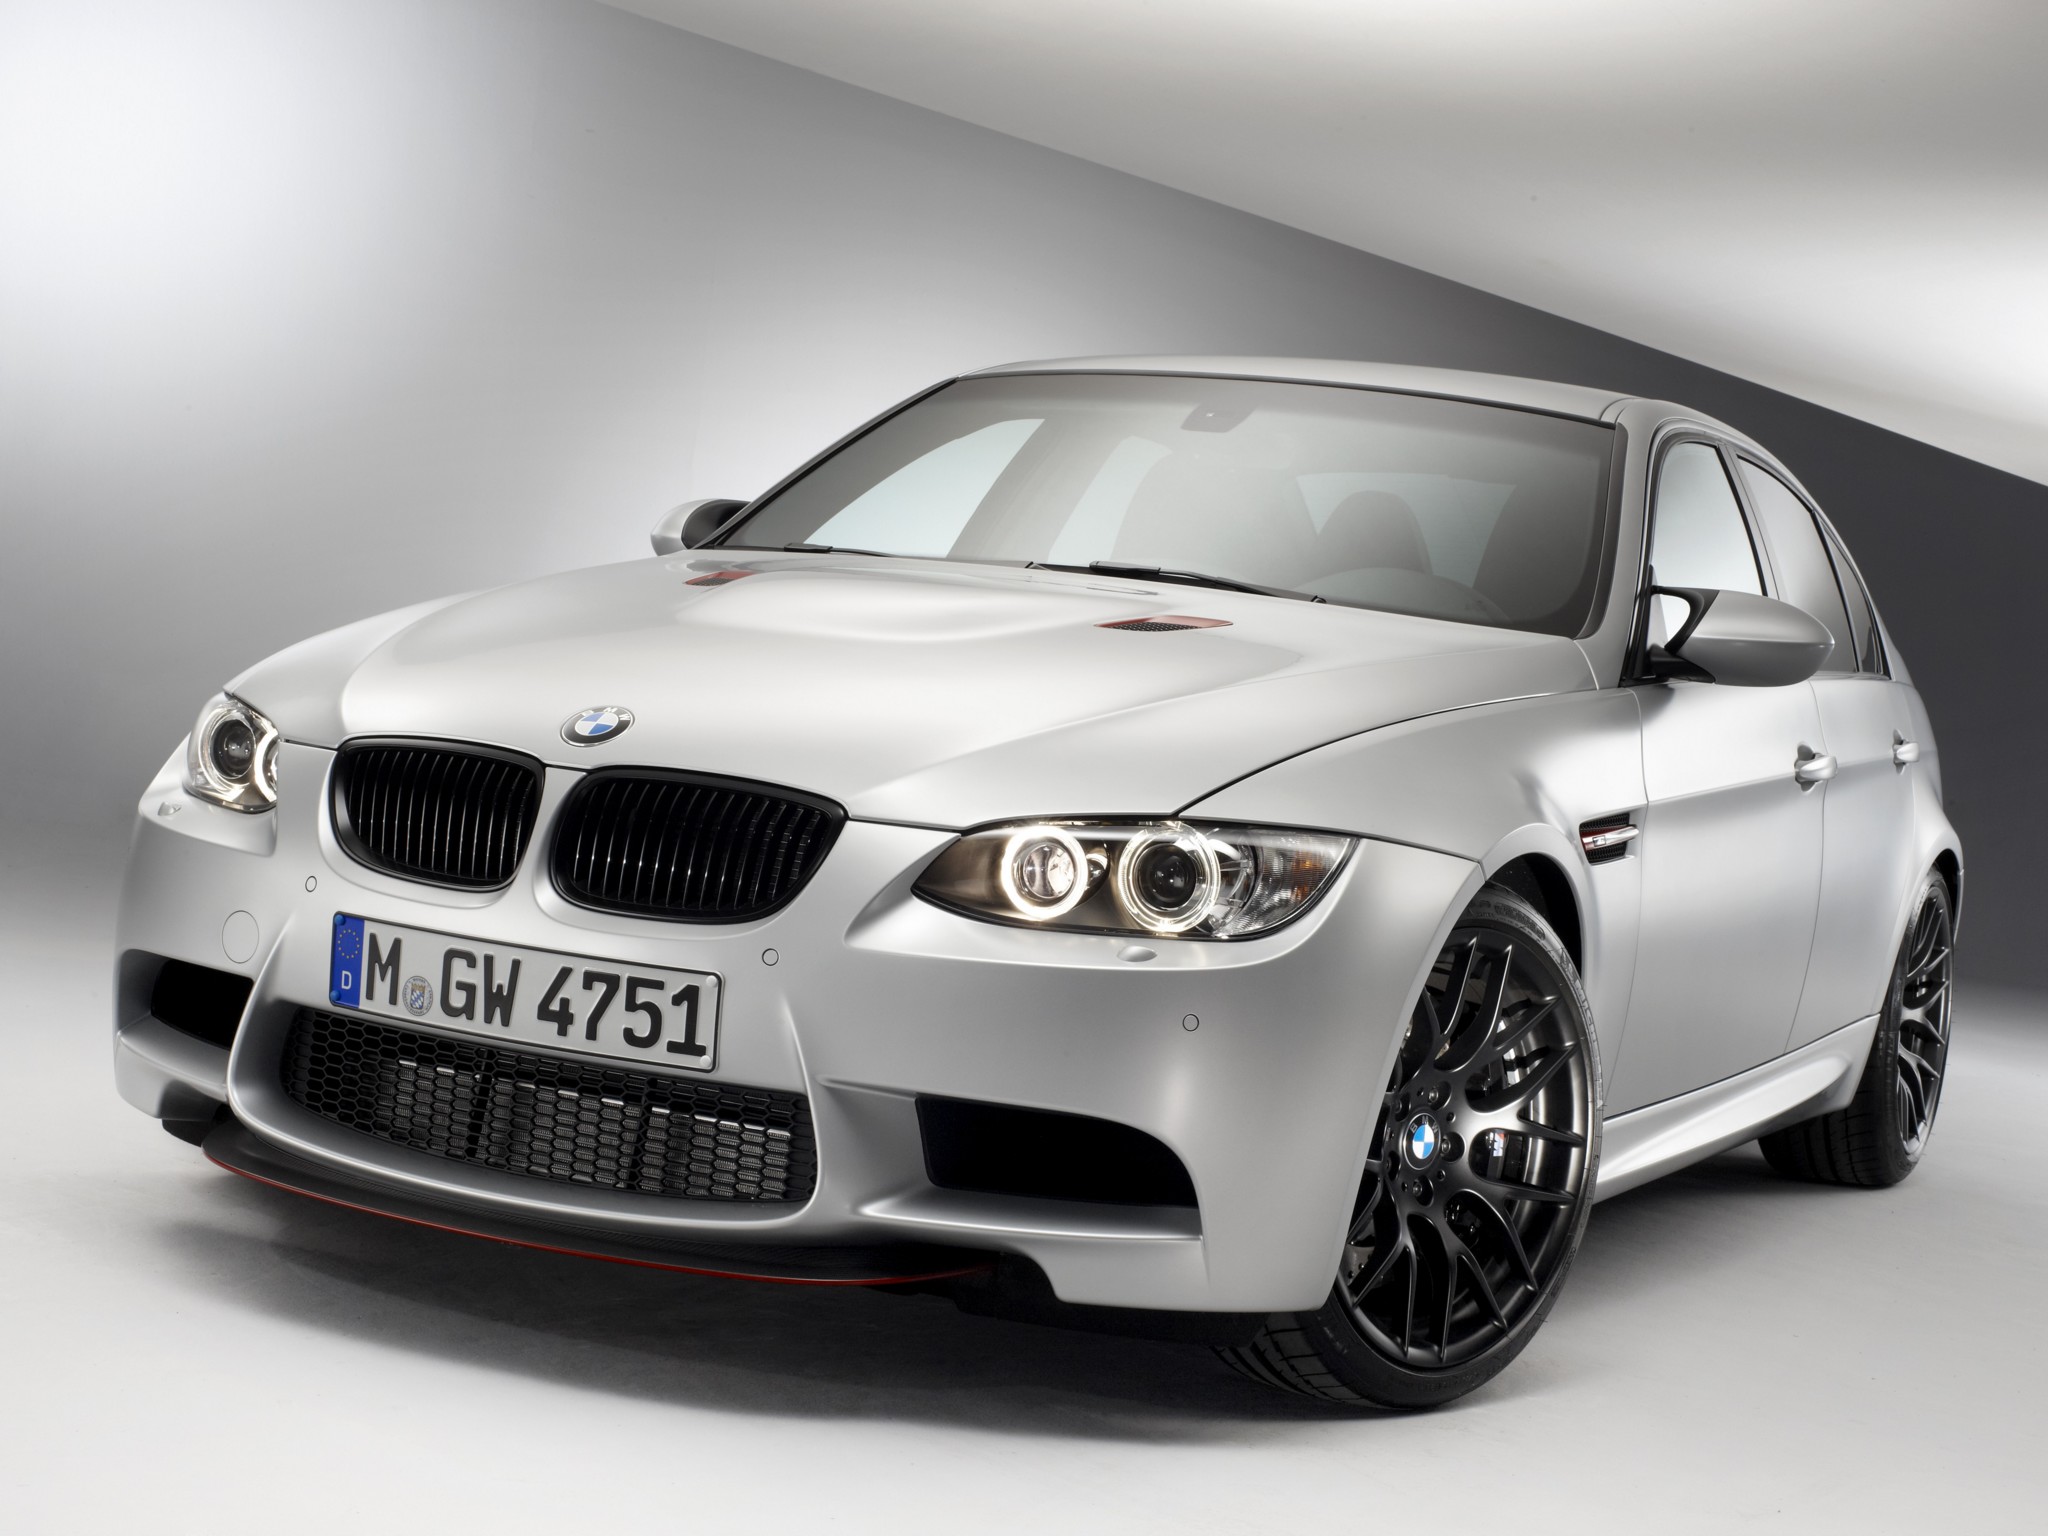 2011 Bmw M3 Ctr Wallpapers Supercars Net